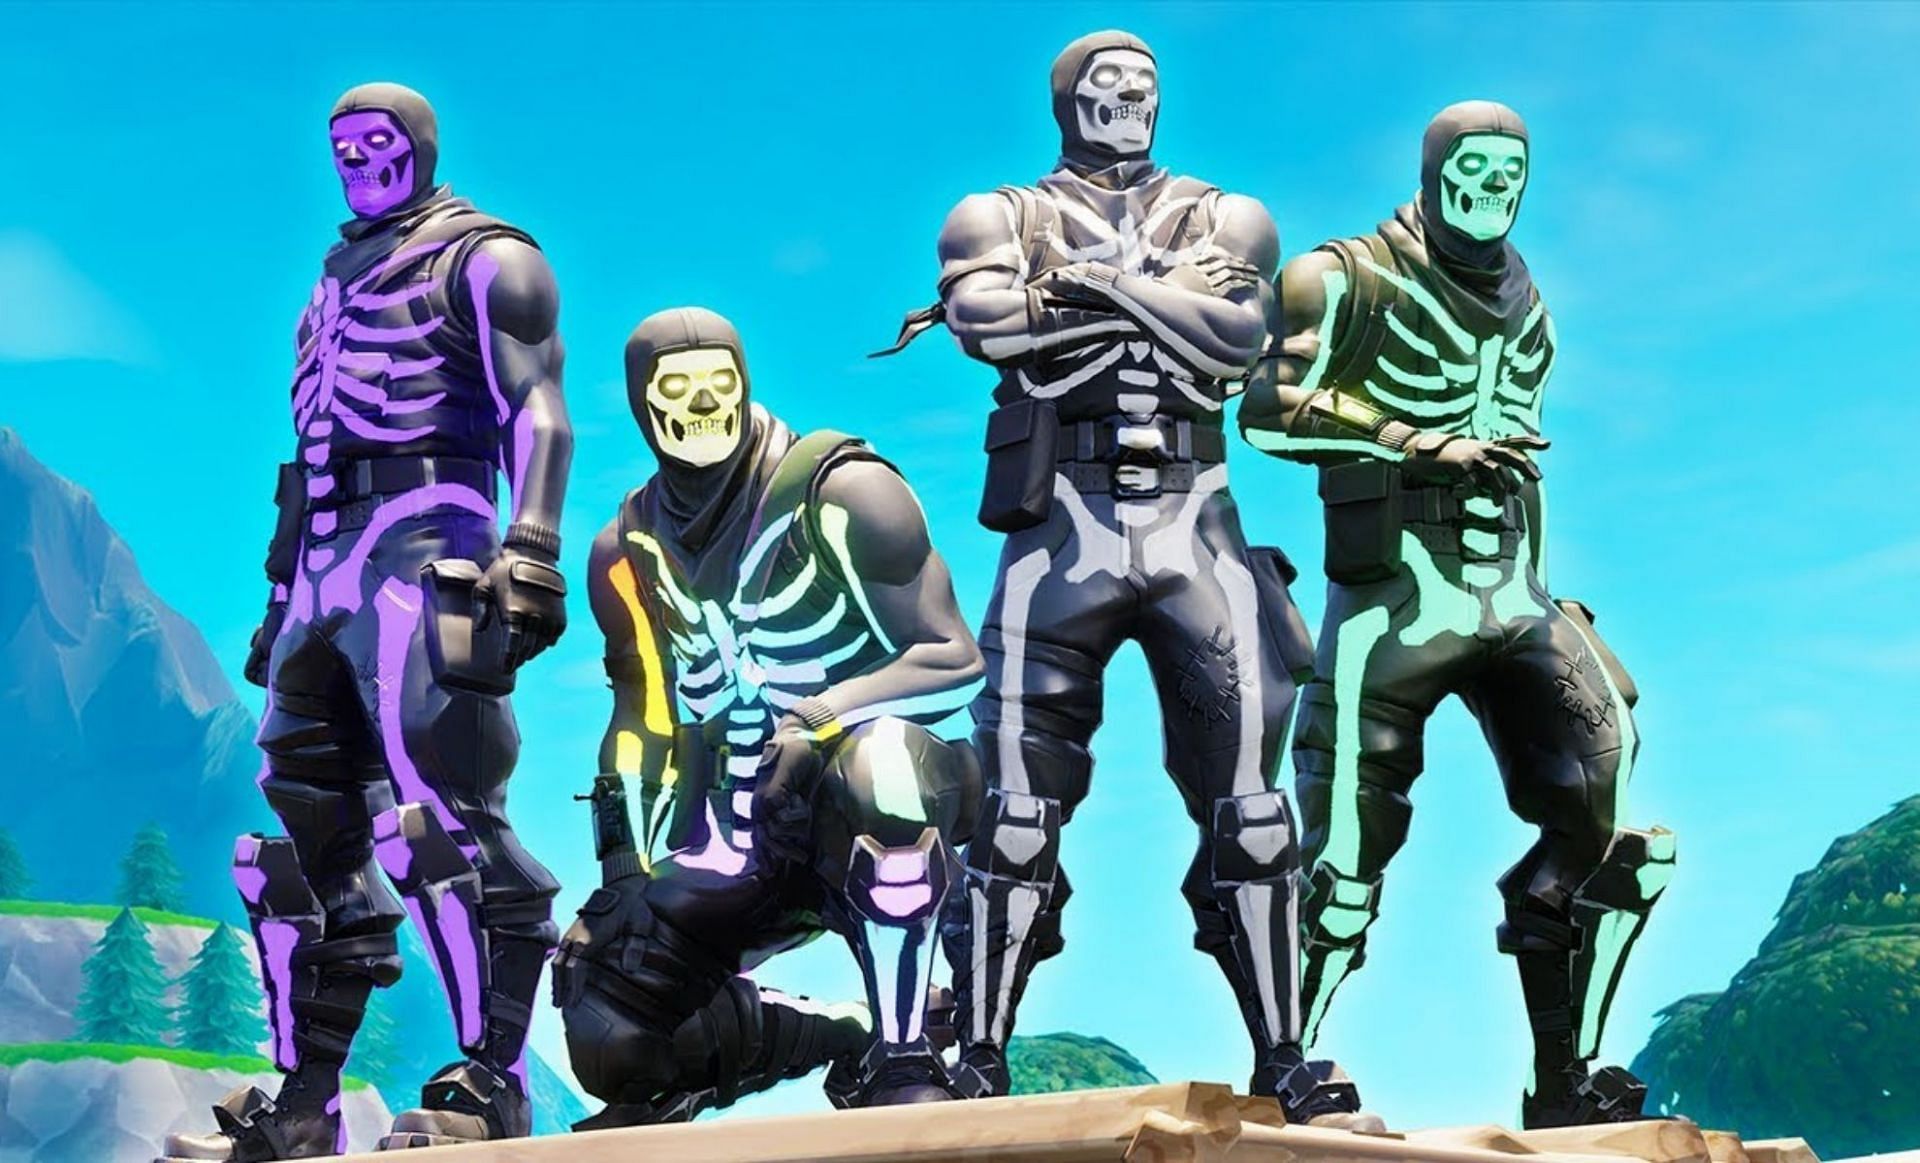 Skull Trooper is one of the oldest skins (Image via McCreamy on YouTube)